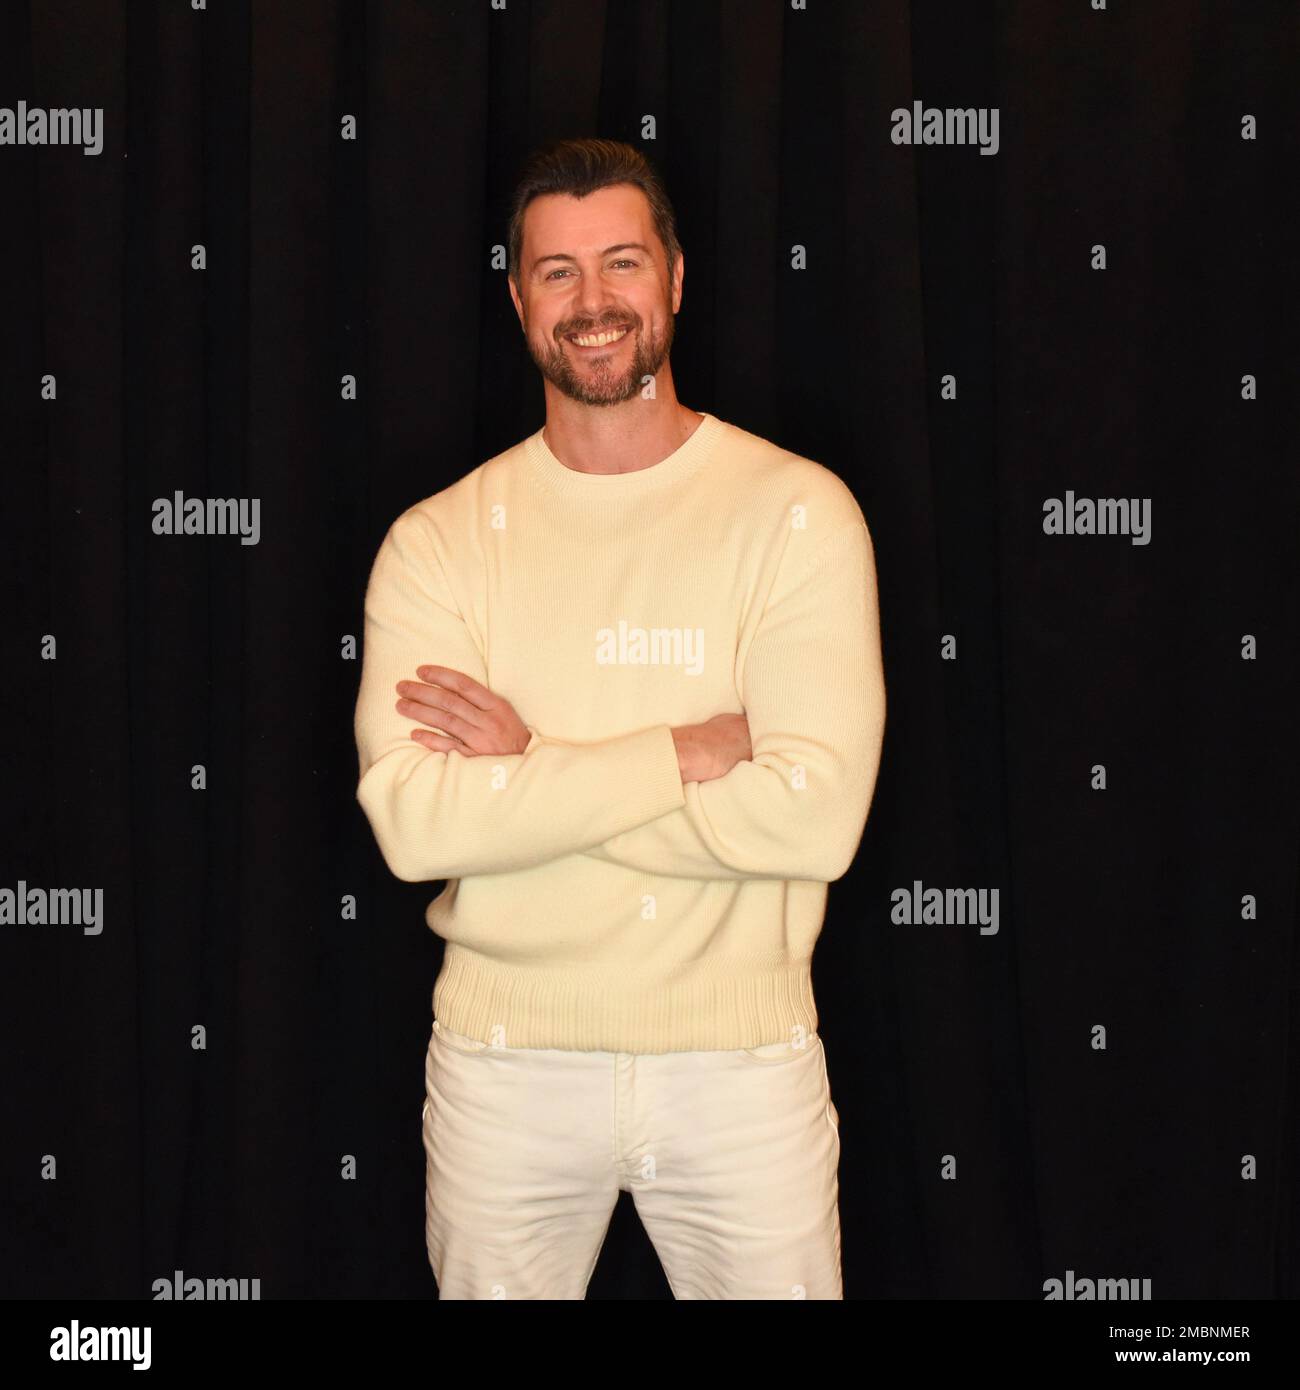 Daniel Feuerriegel attends “Days of Our Lives” Day of Days event. Photo: Michael Mattes/michaelmattes.co Stock Photo